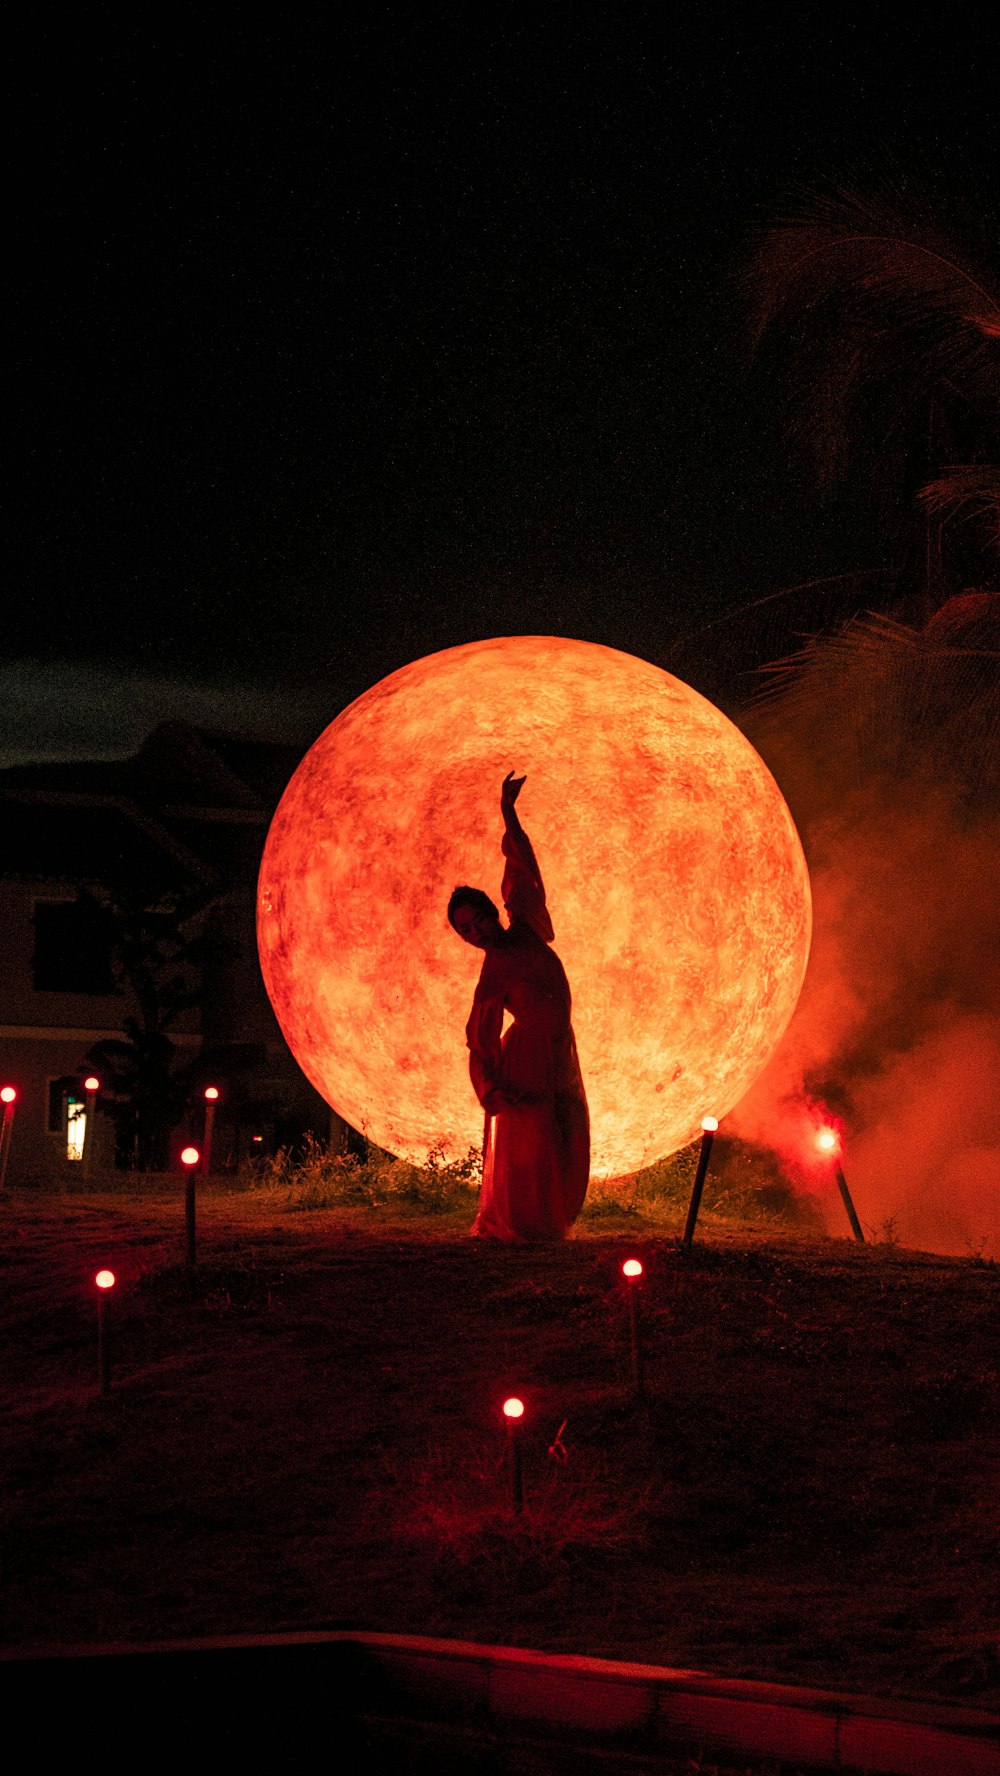 a person standing in front of a giant orange ball